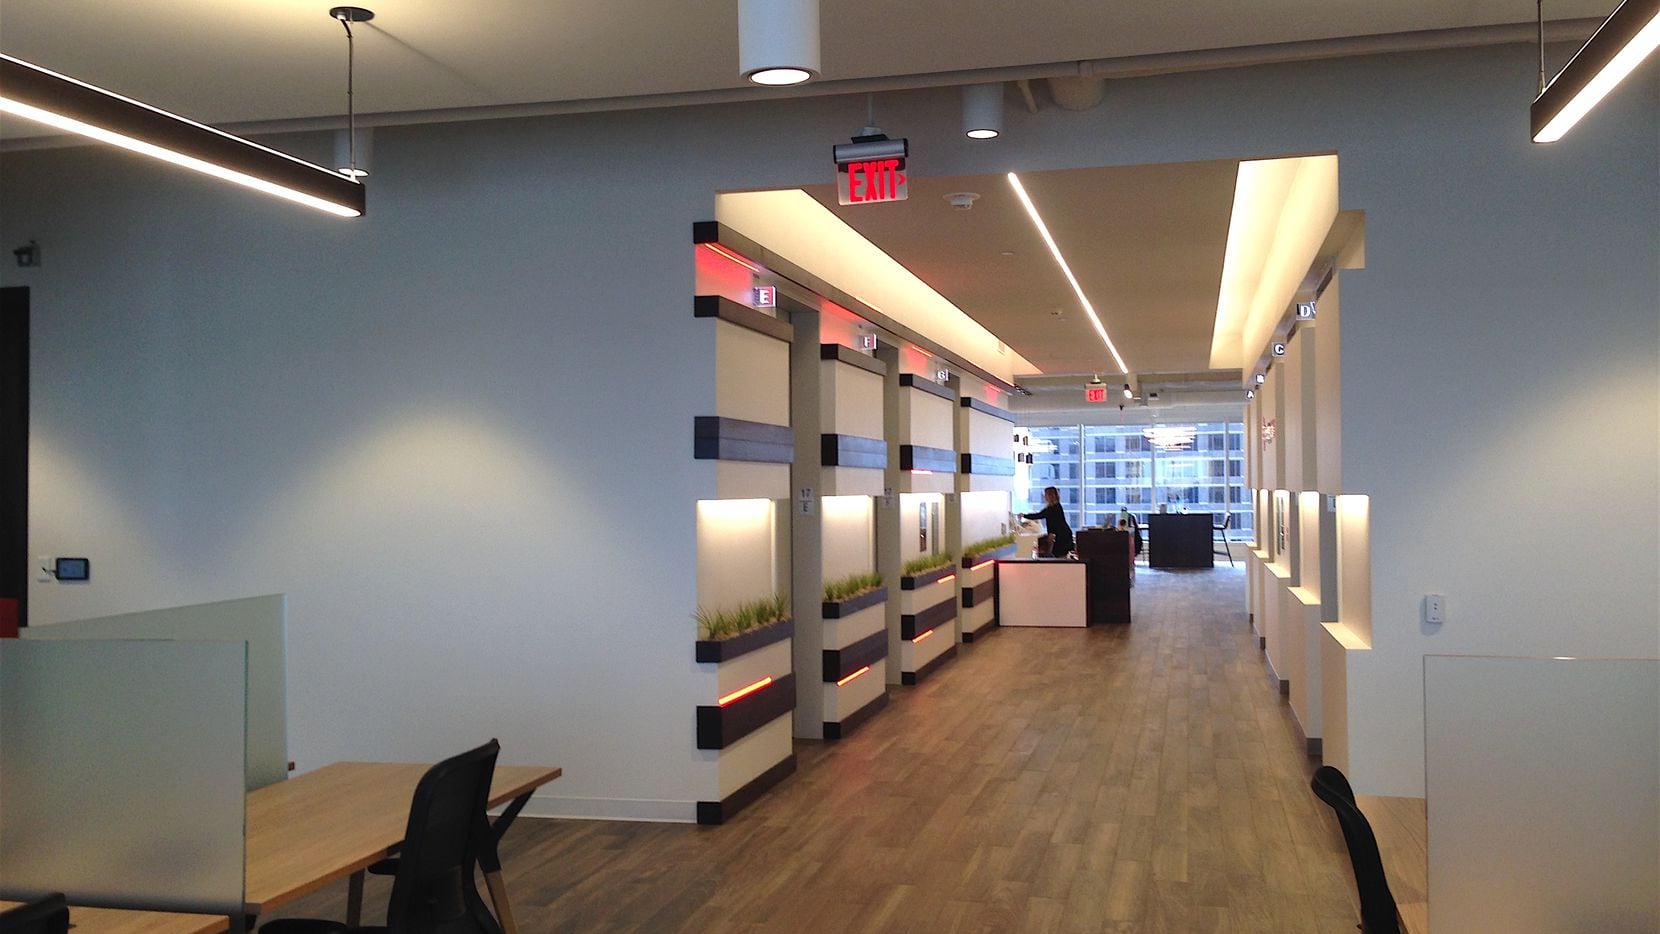 Serendipity Labs' first Dallas co-working center is in the KPMG Plaza building on Ross Avenue.